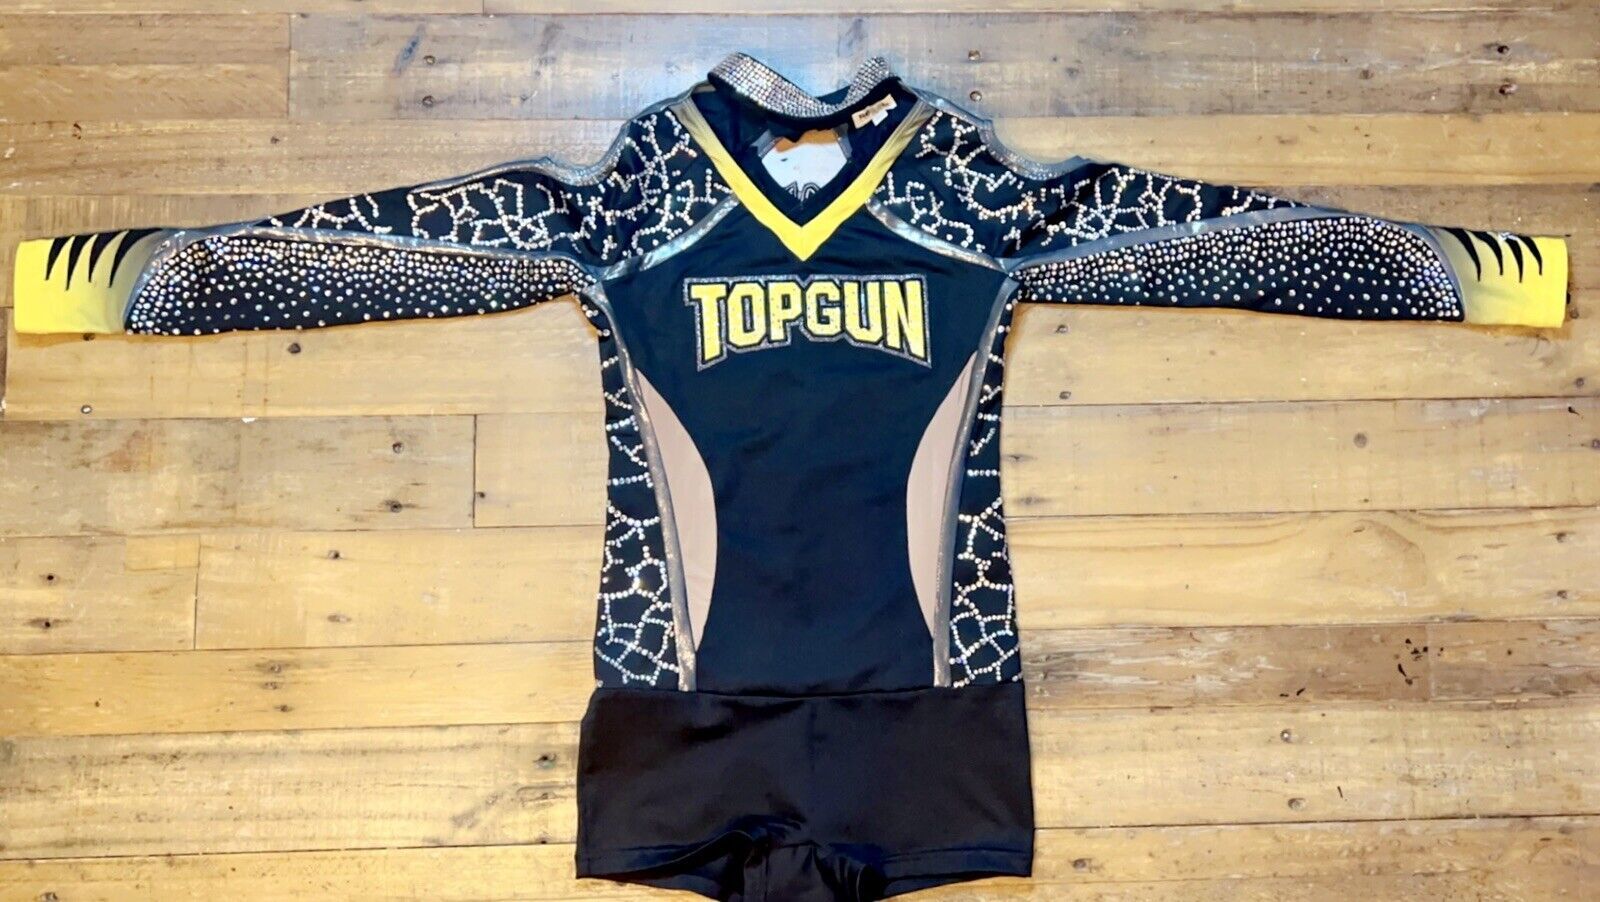 Primary image for Rebel Athletic Top Gun Allstars Cheerleading Uniform - Youth Large